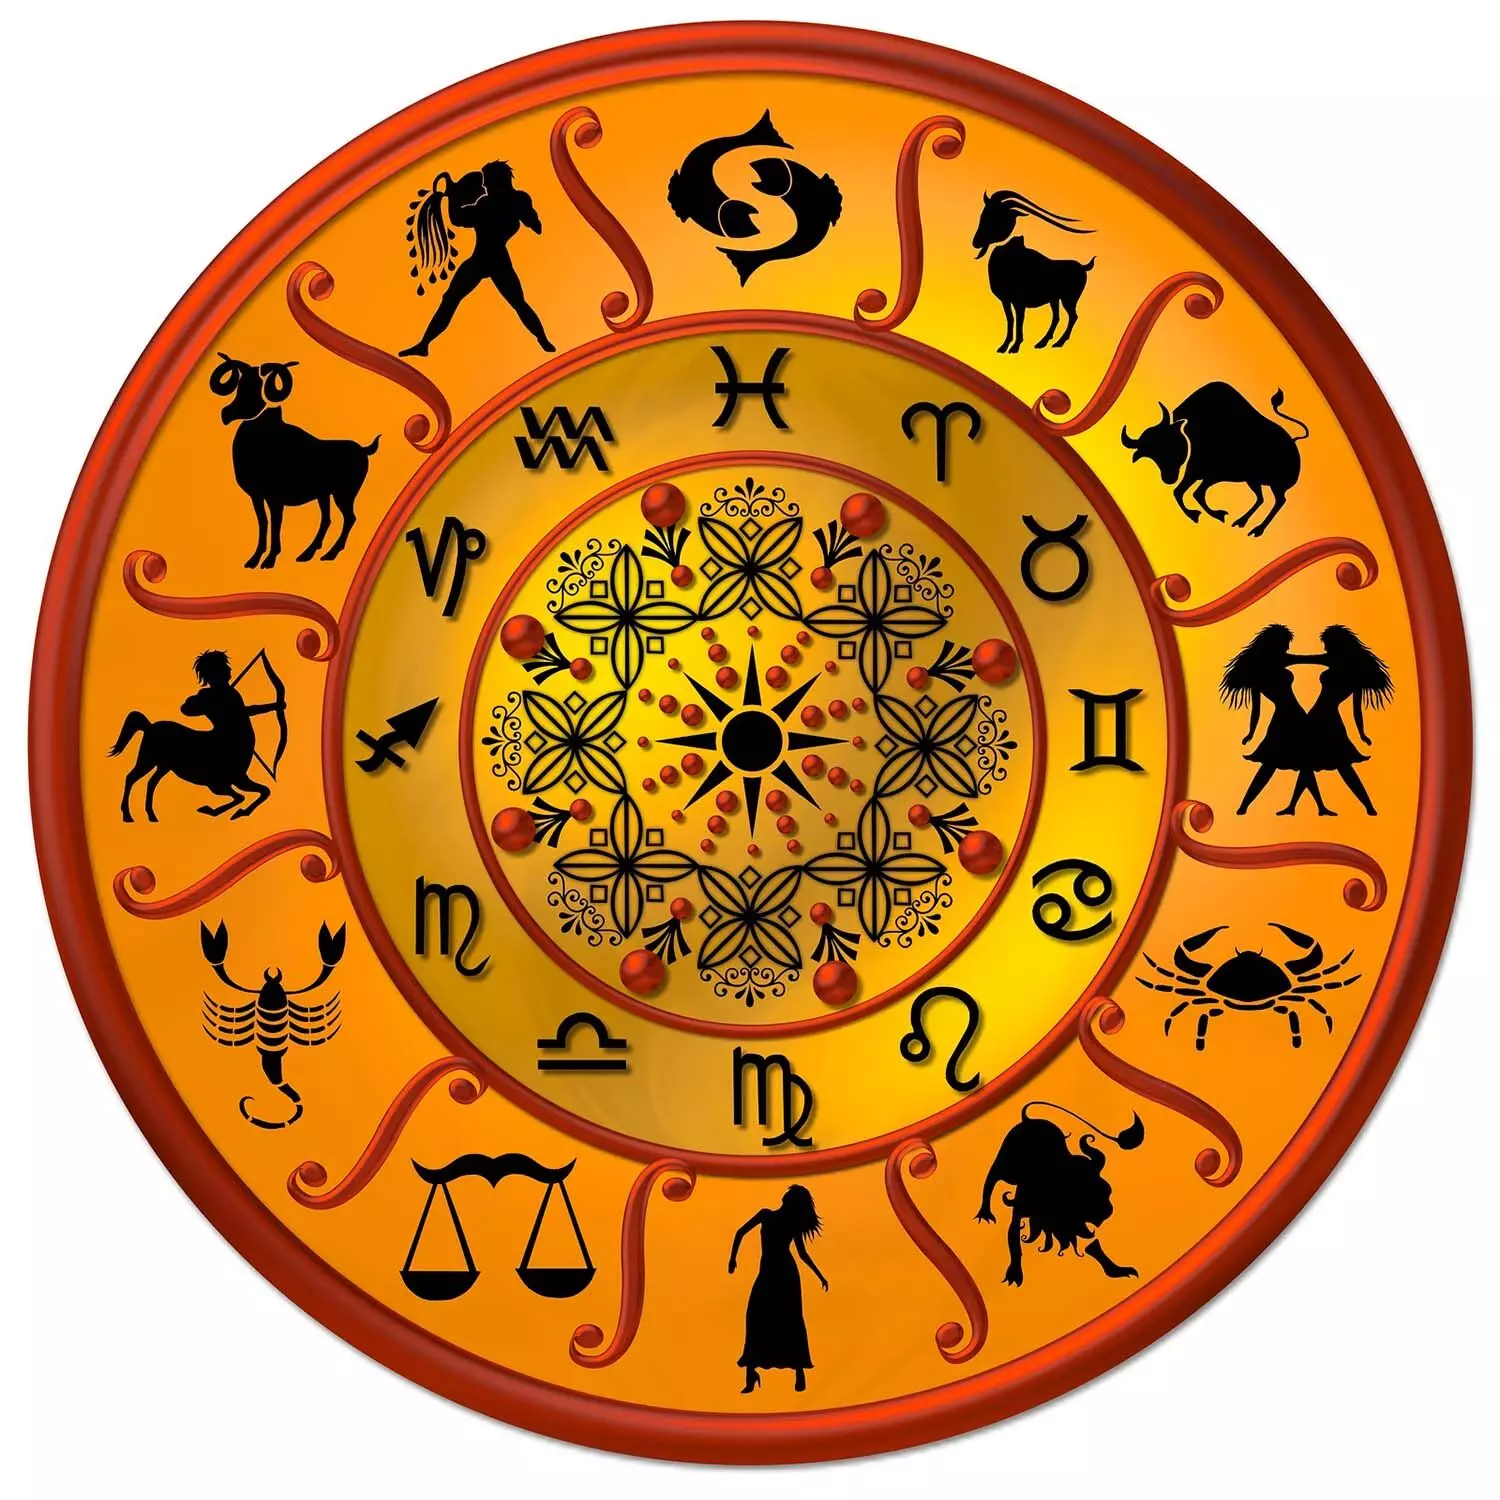 17 July – Know your todays horoscope